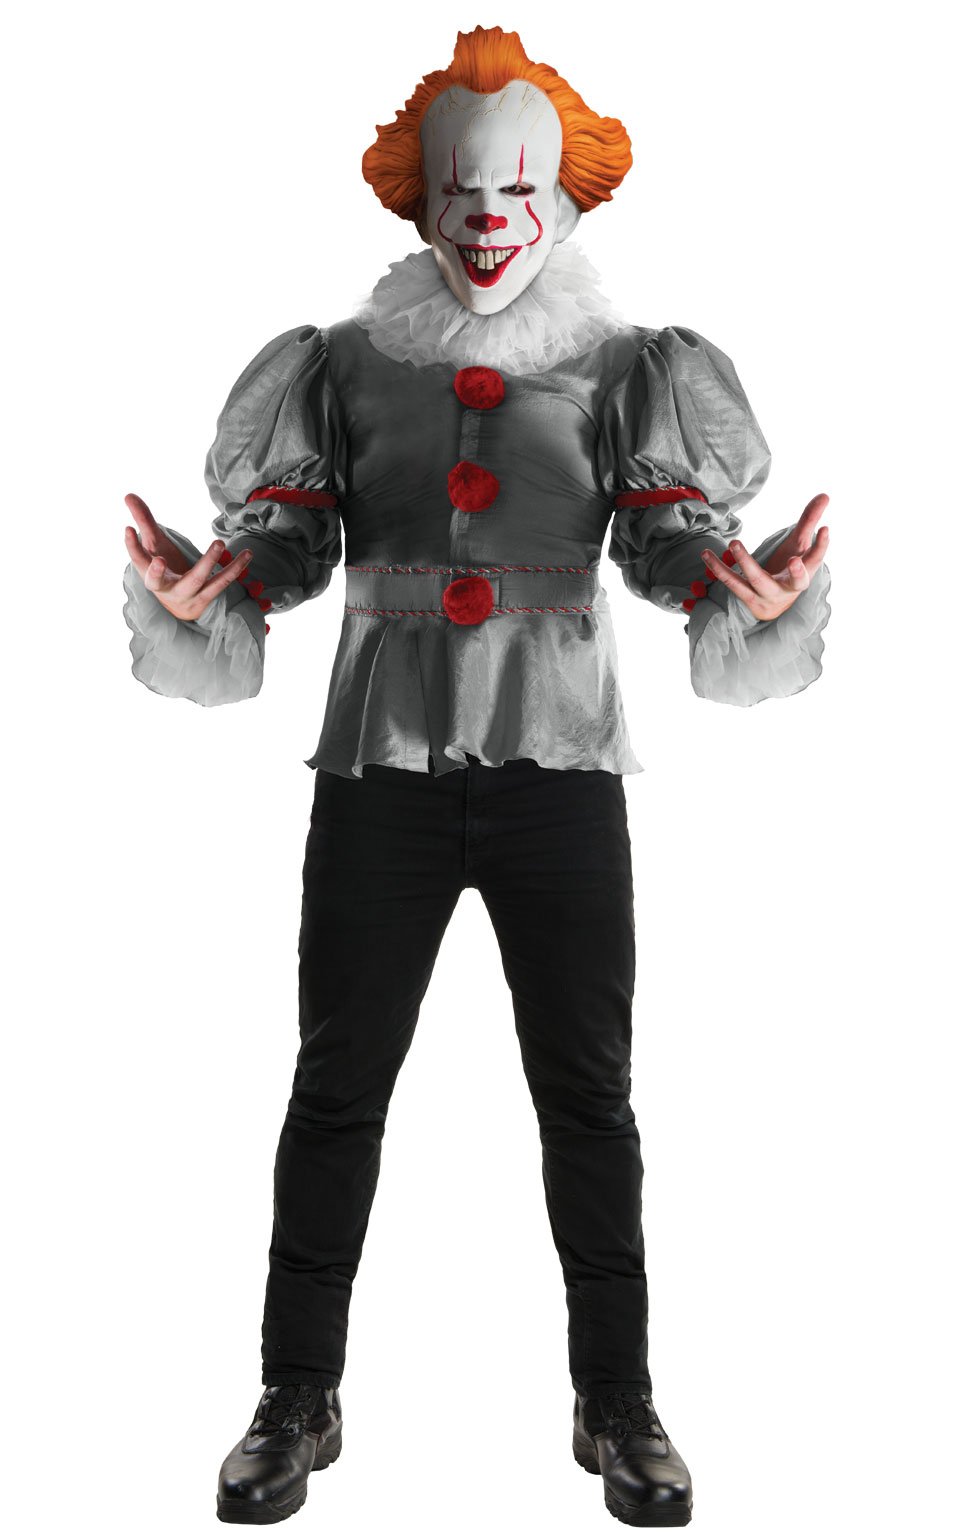 Photos - Fancy Dress Rubies Adult Deluxe Movie Pennywise IT Costume, Standard 